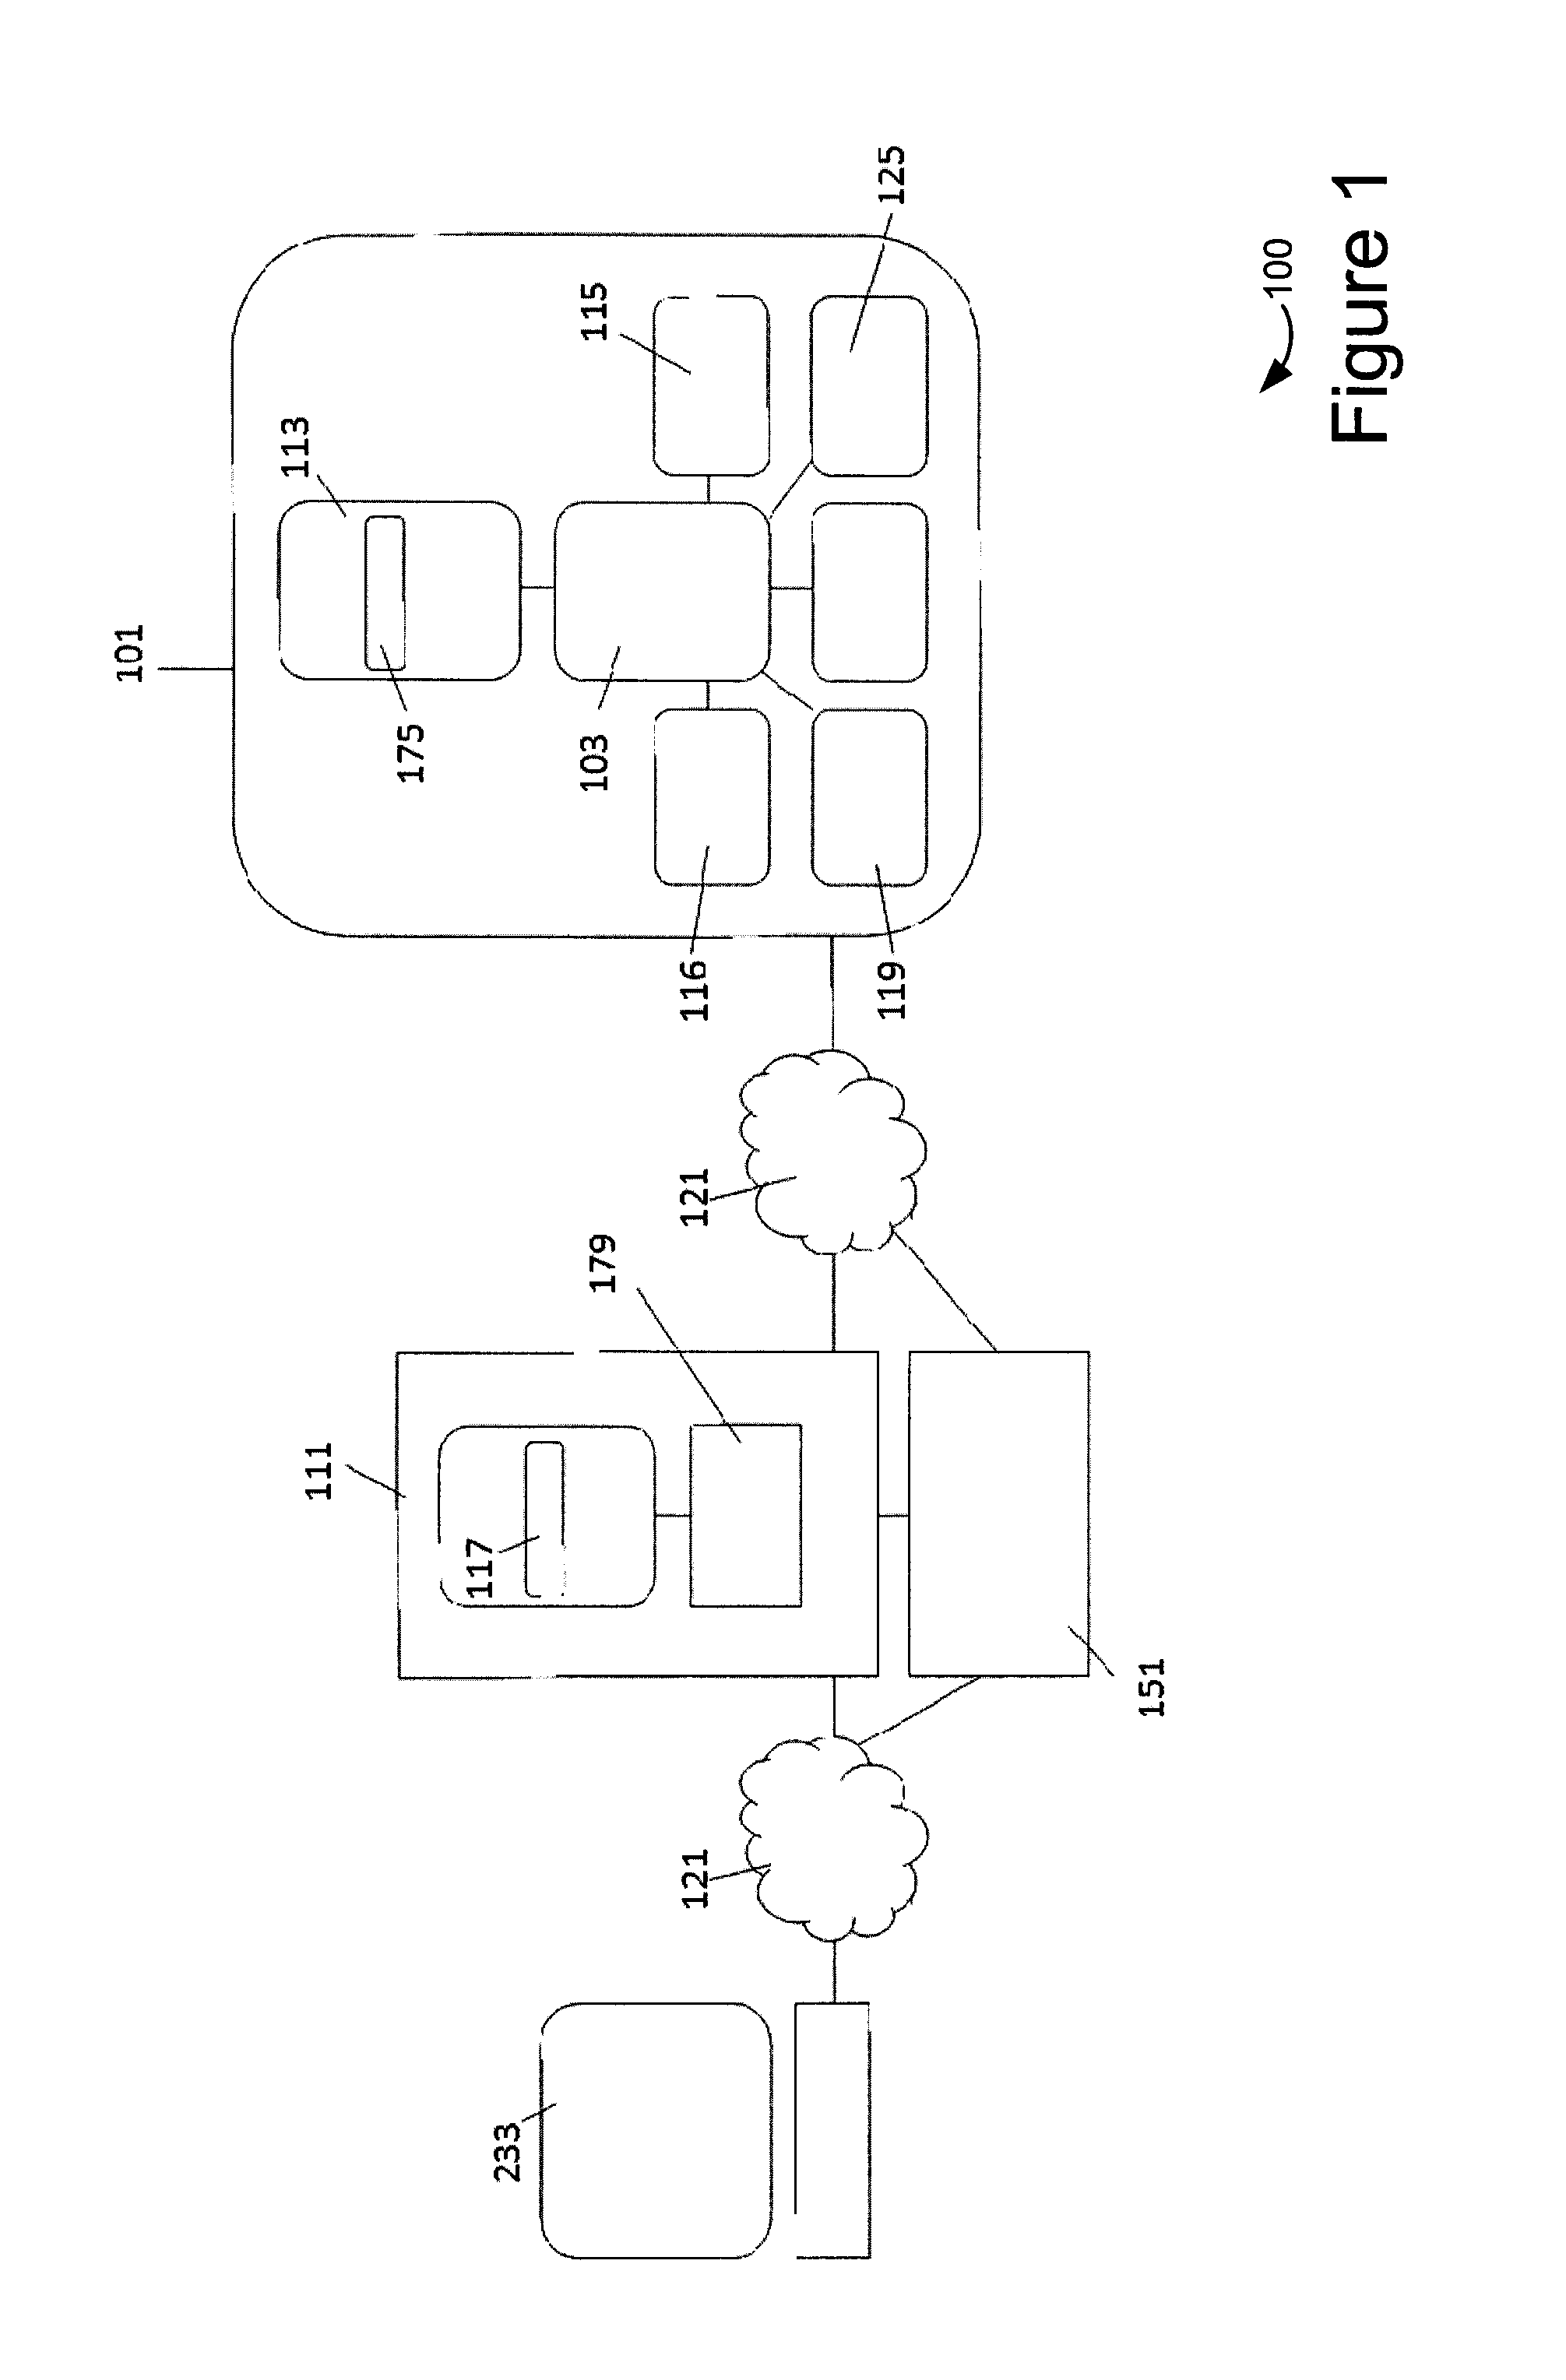 Methods and systems for secure network connections